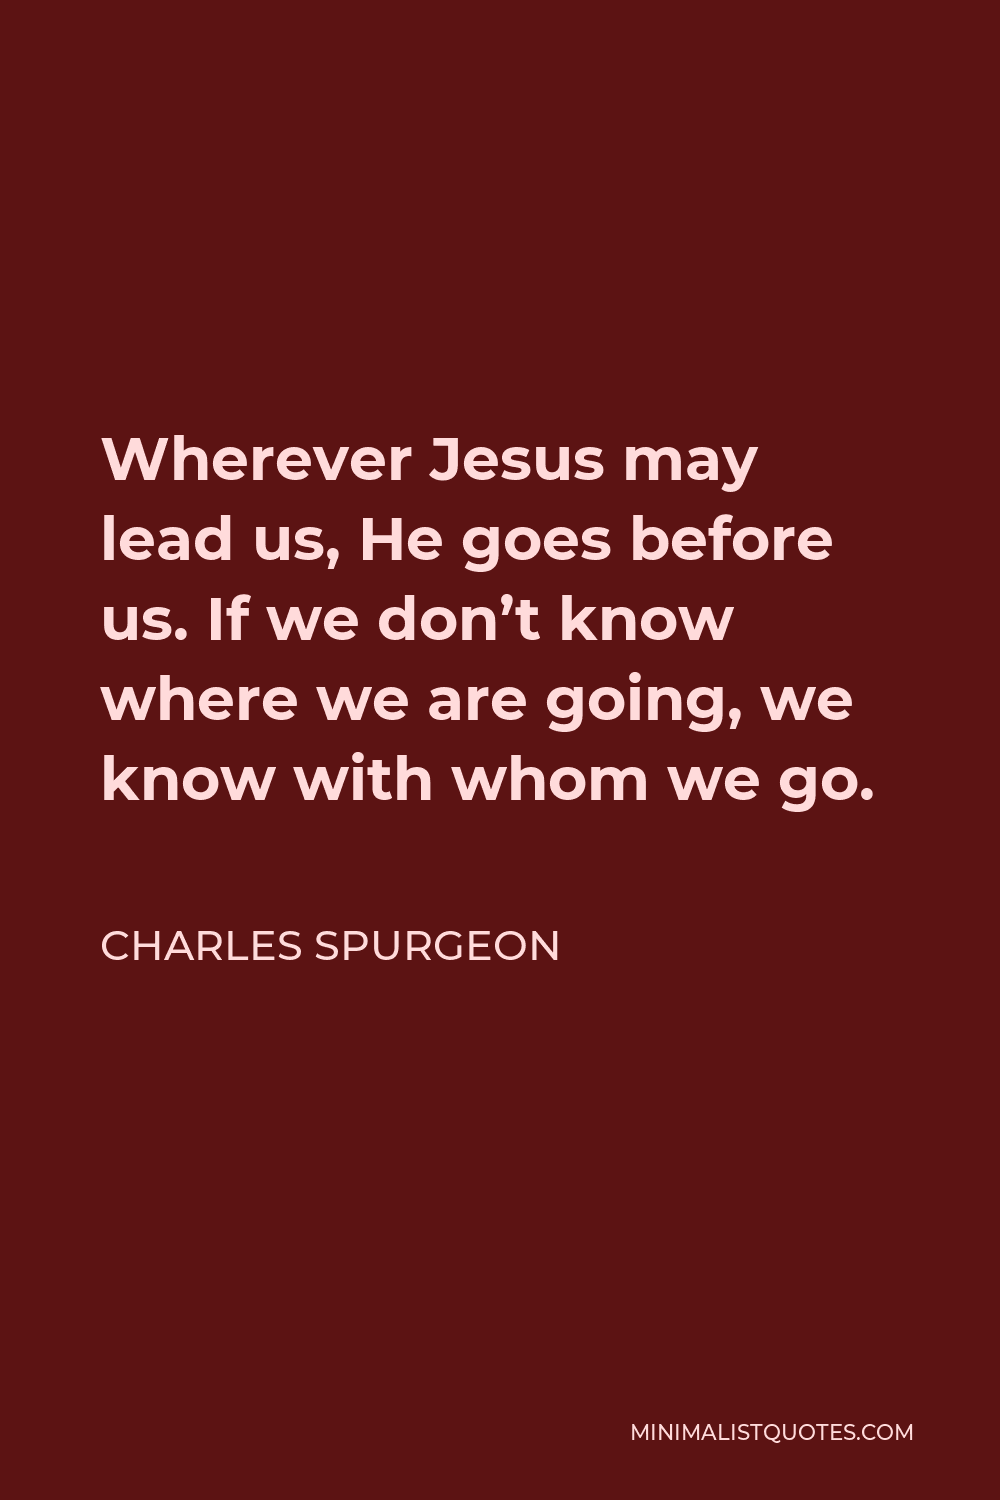 Charles Spurgeon Quote - Wherever Jesus may lead us, He goes before us. If we don’t know where we are going, we know with whom we go.